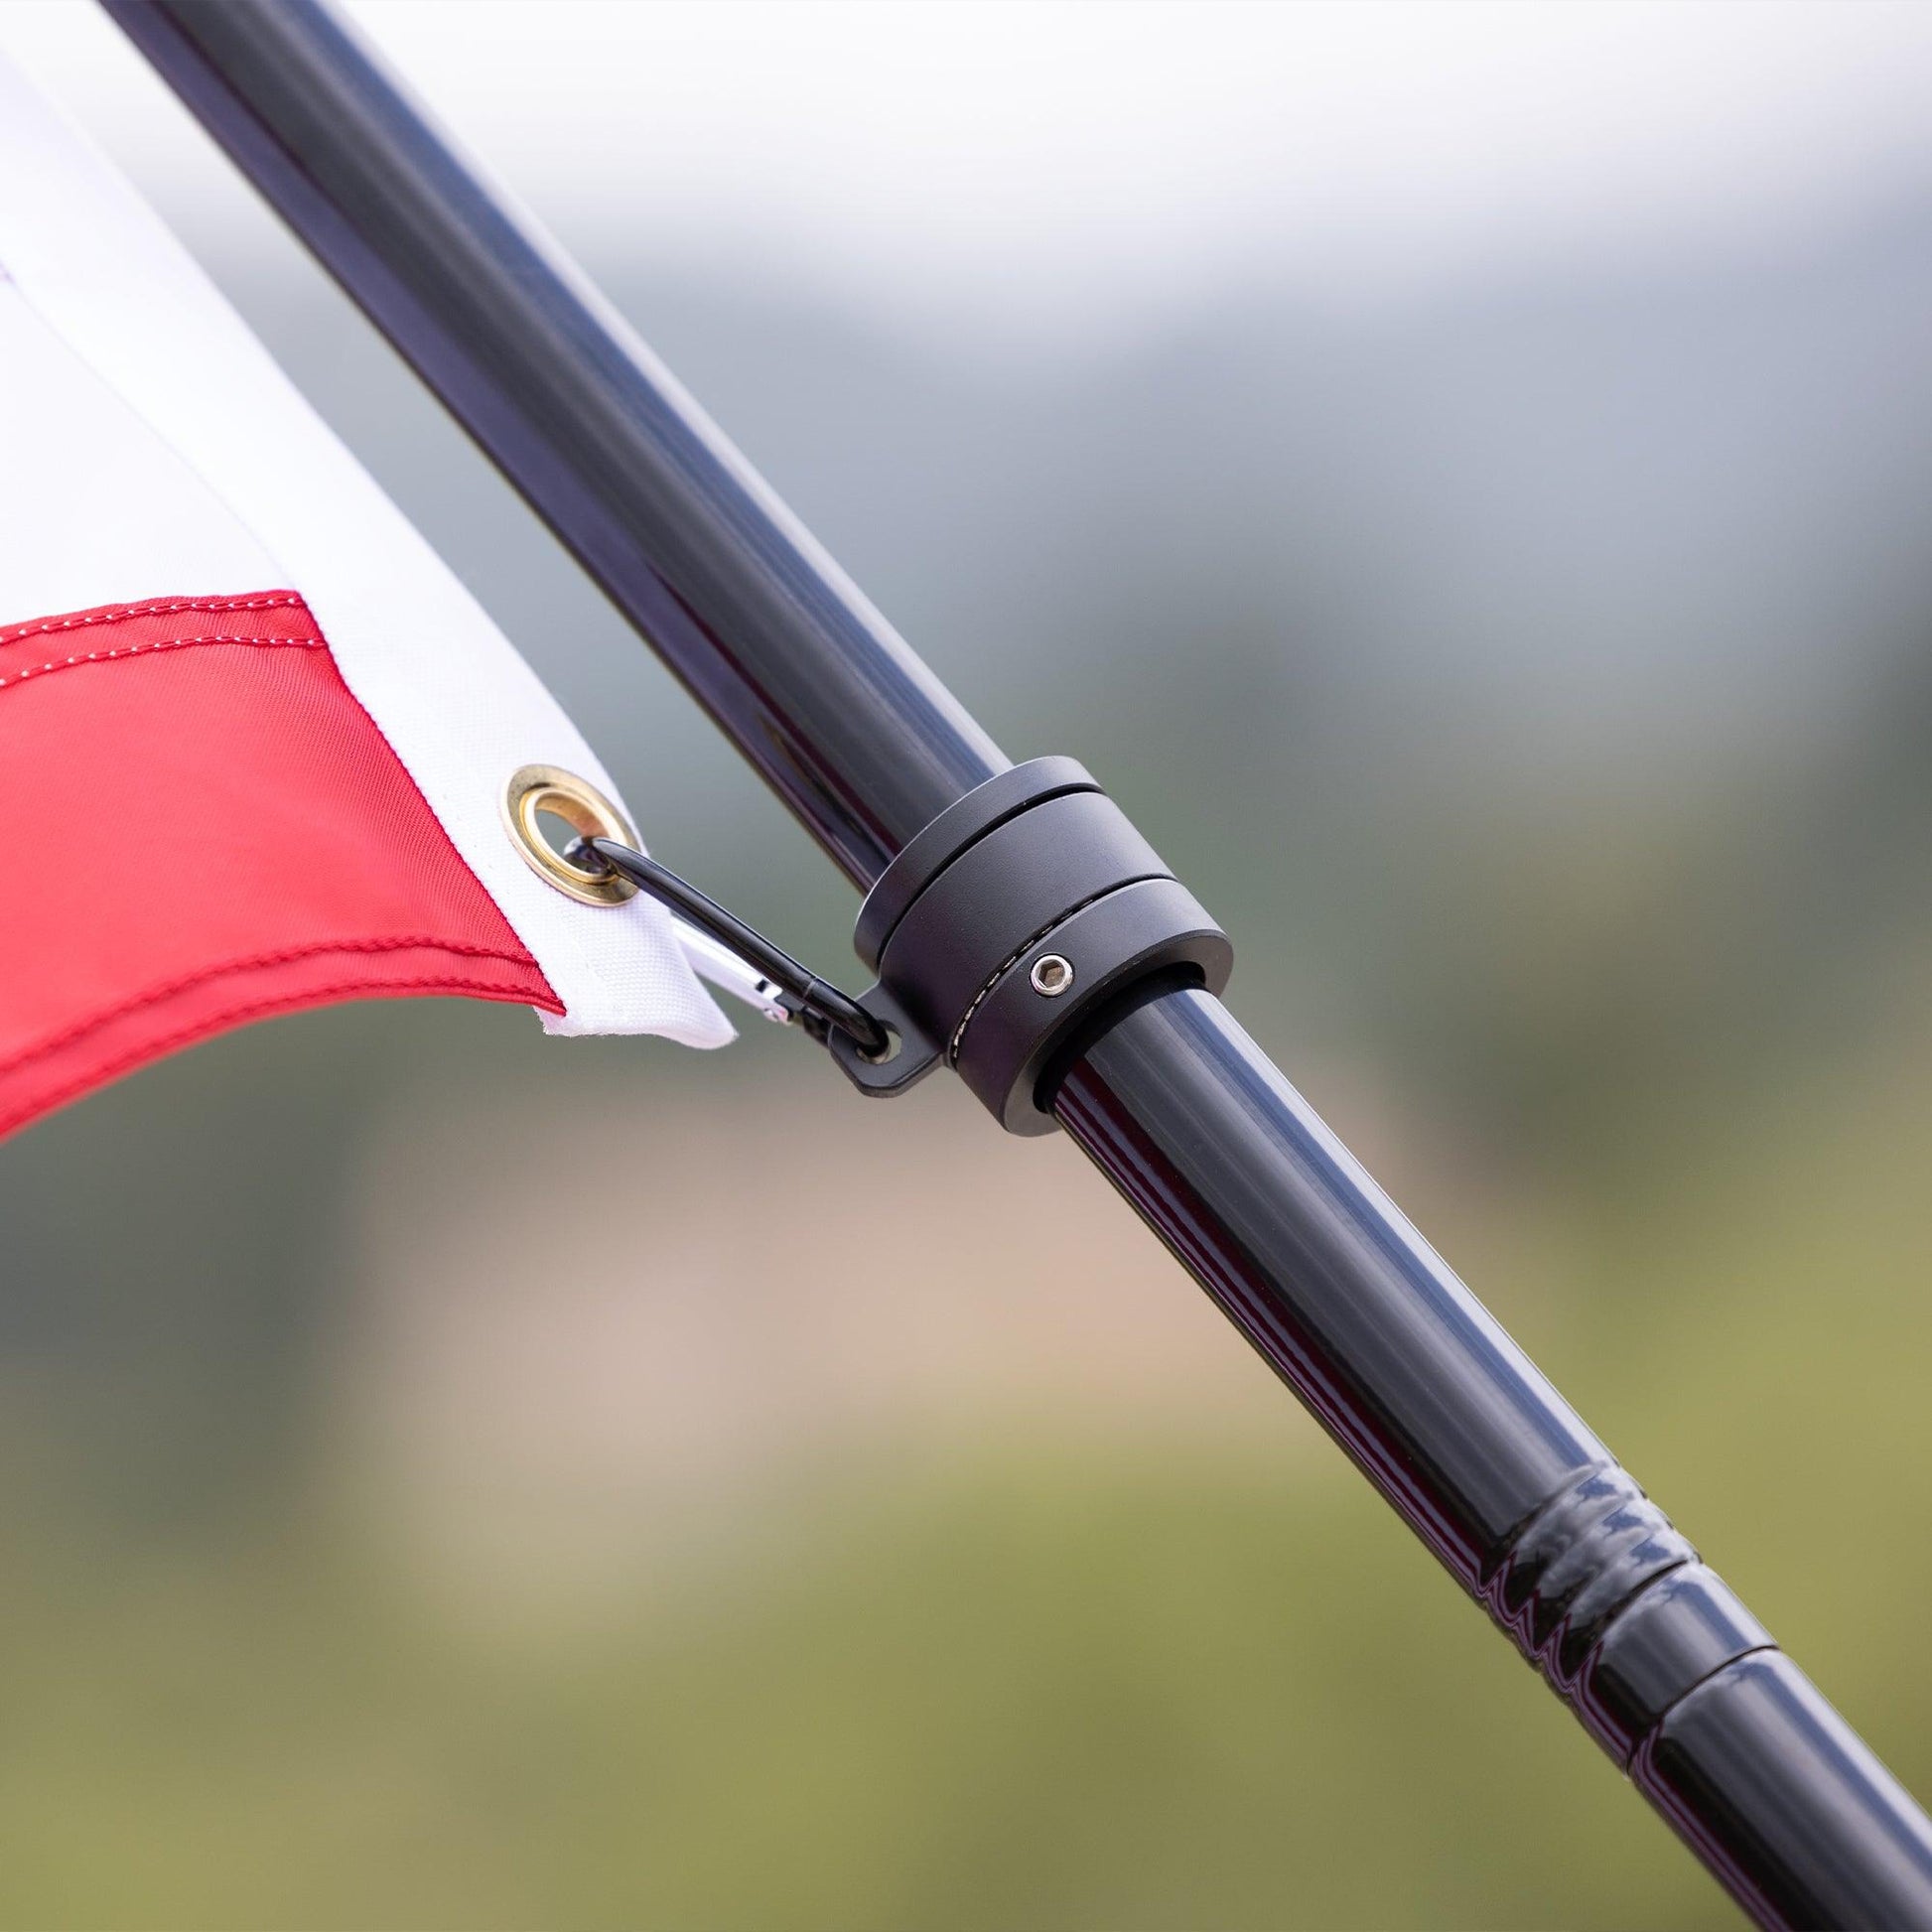 Close-up of The FlagStars 6 FT ALUMINUM FLAG POLE WITH TANGLE FREE SPINNERS featuring a black mount with a red and white flag attached, set against an out-of-focus natural background.